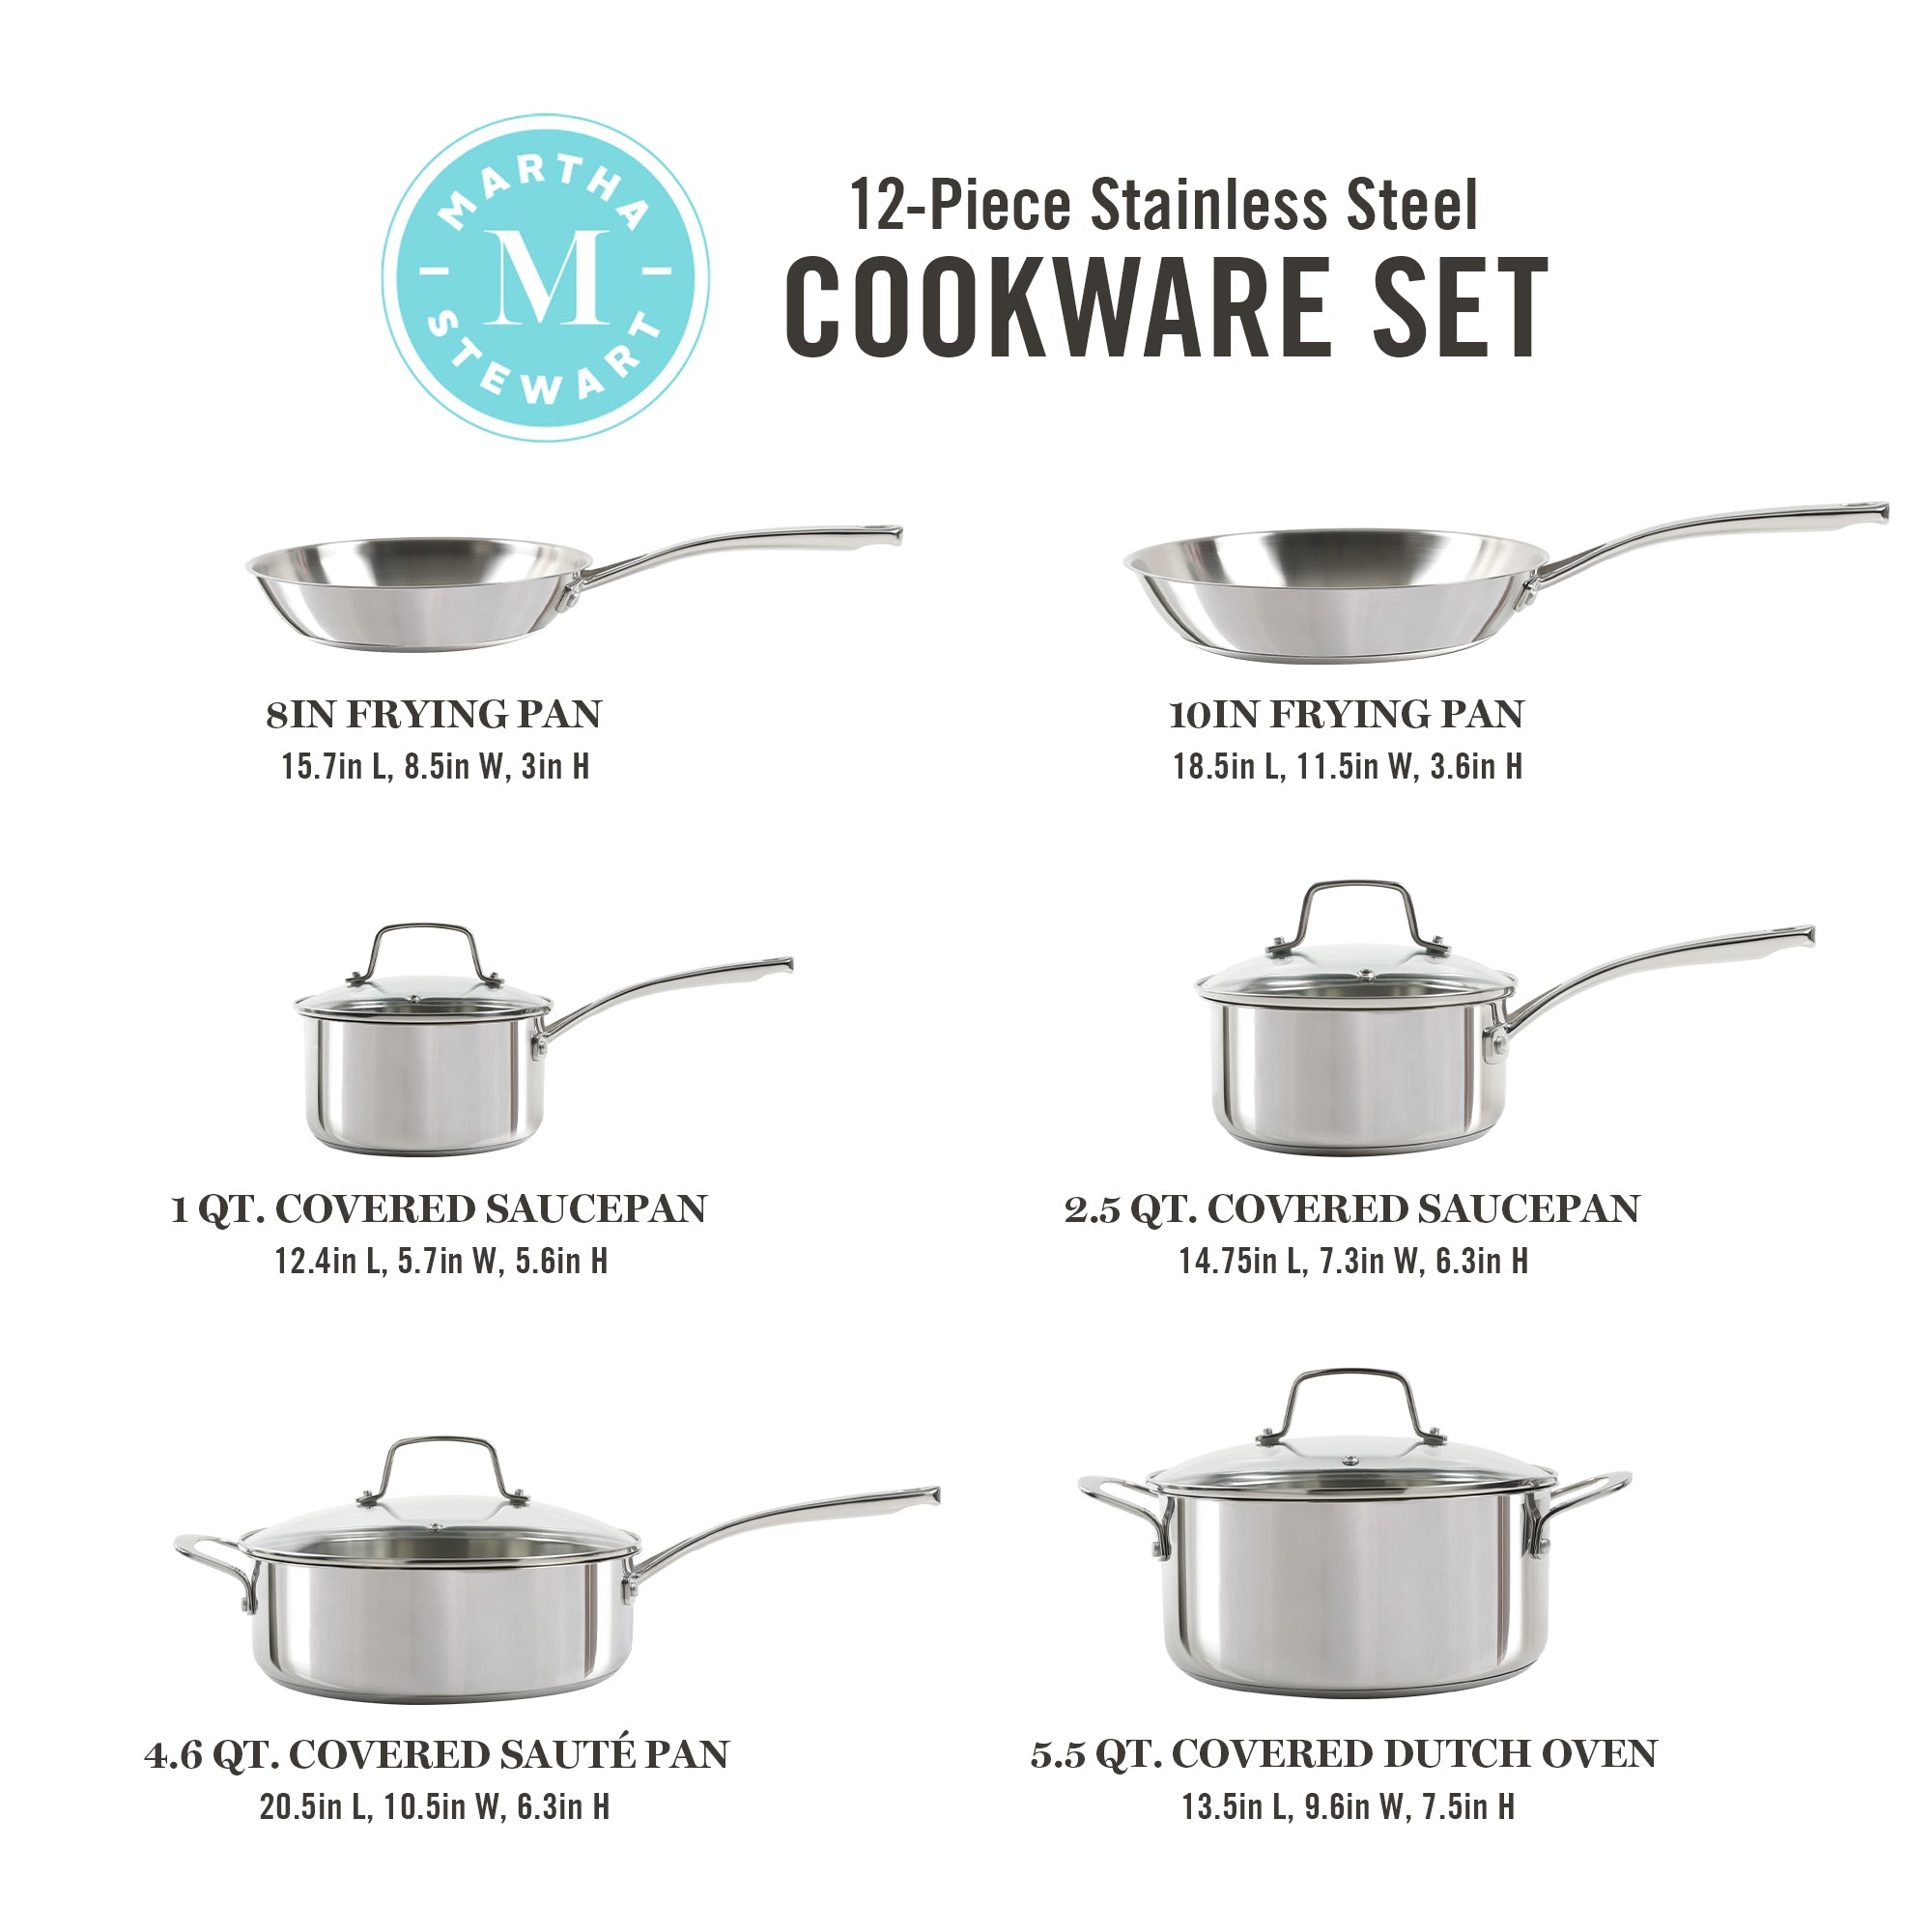 Mainstays Stainless Steel 1-Quart Saucepan with Straining Lid 